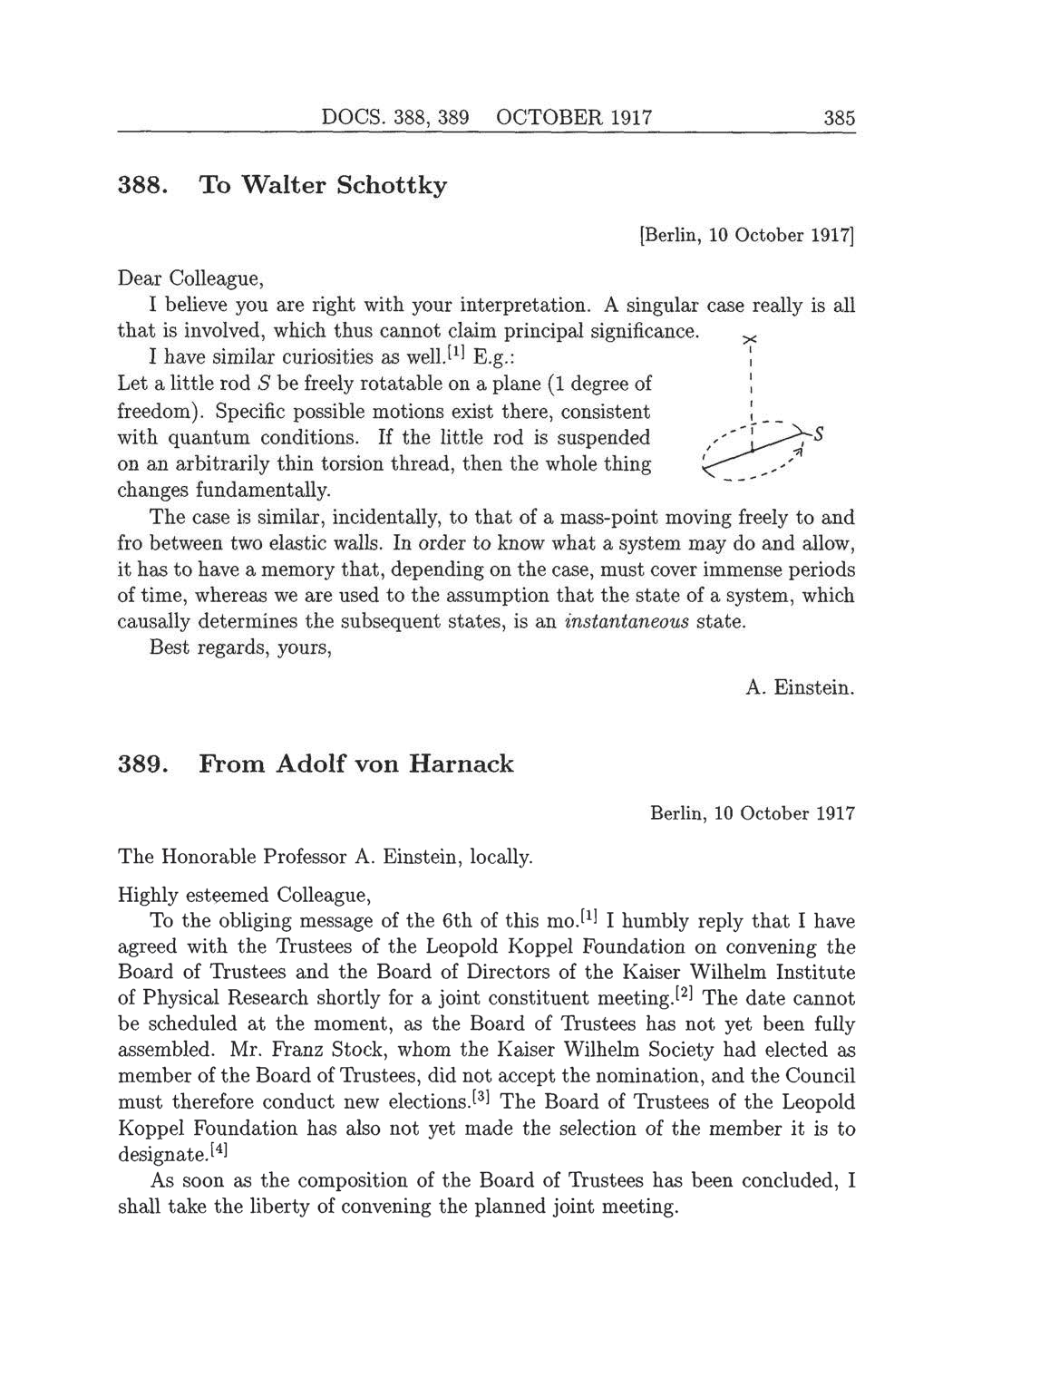 Volume 8: The Berlin Years: Correspondence, 1914-1918 (English translation supplement) page 385